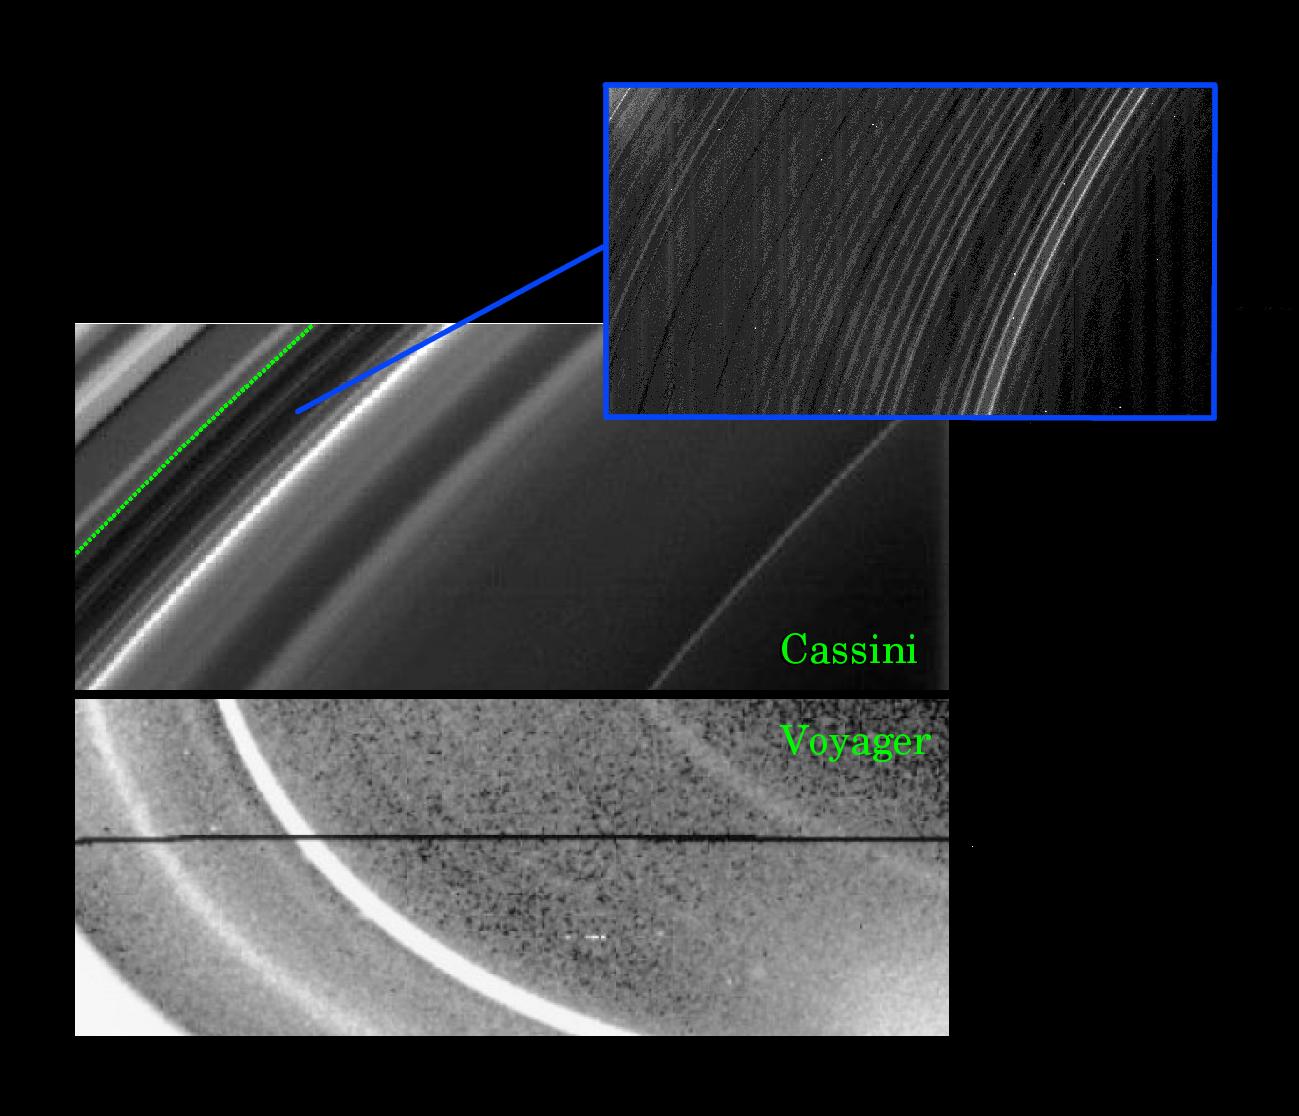 This montage of images from the NASA Cassini and Voyager missions shows that structural evolution has occurred in Saturn's D ring (the innermost ring) during the quarter century separating the two missions.